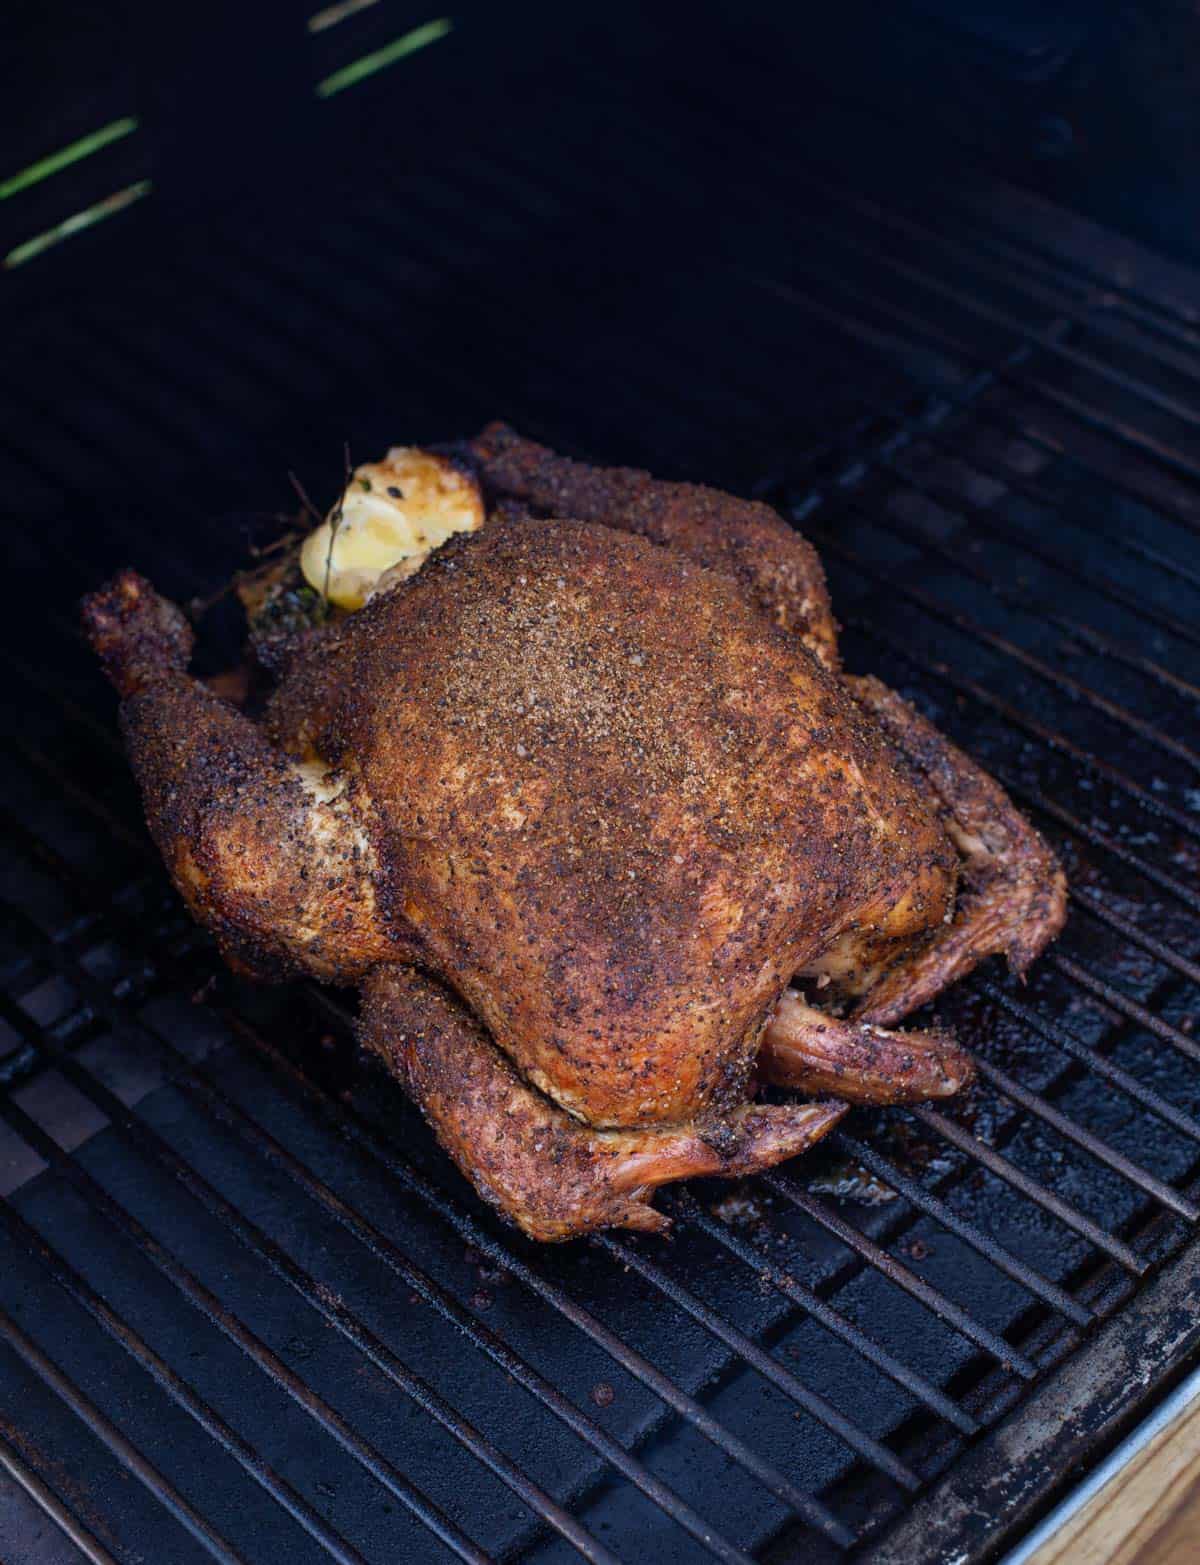 A whole chicken cooking on a pellet grill